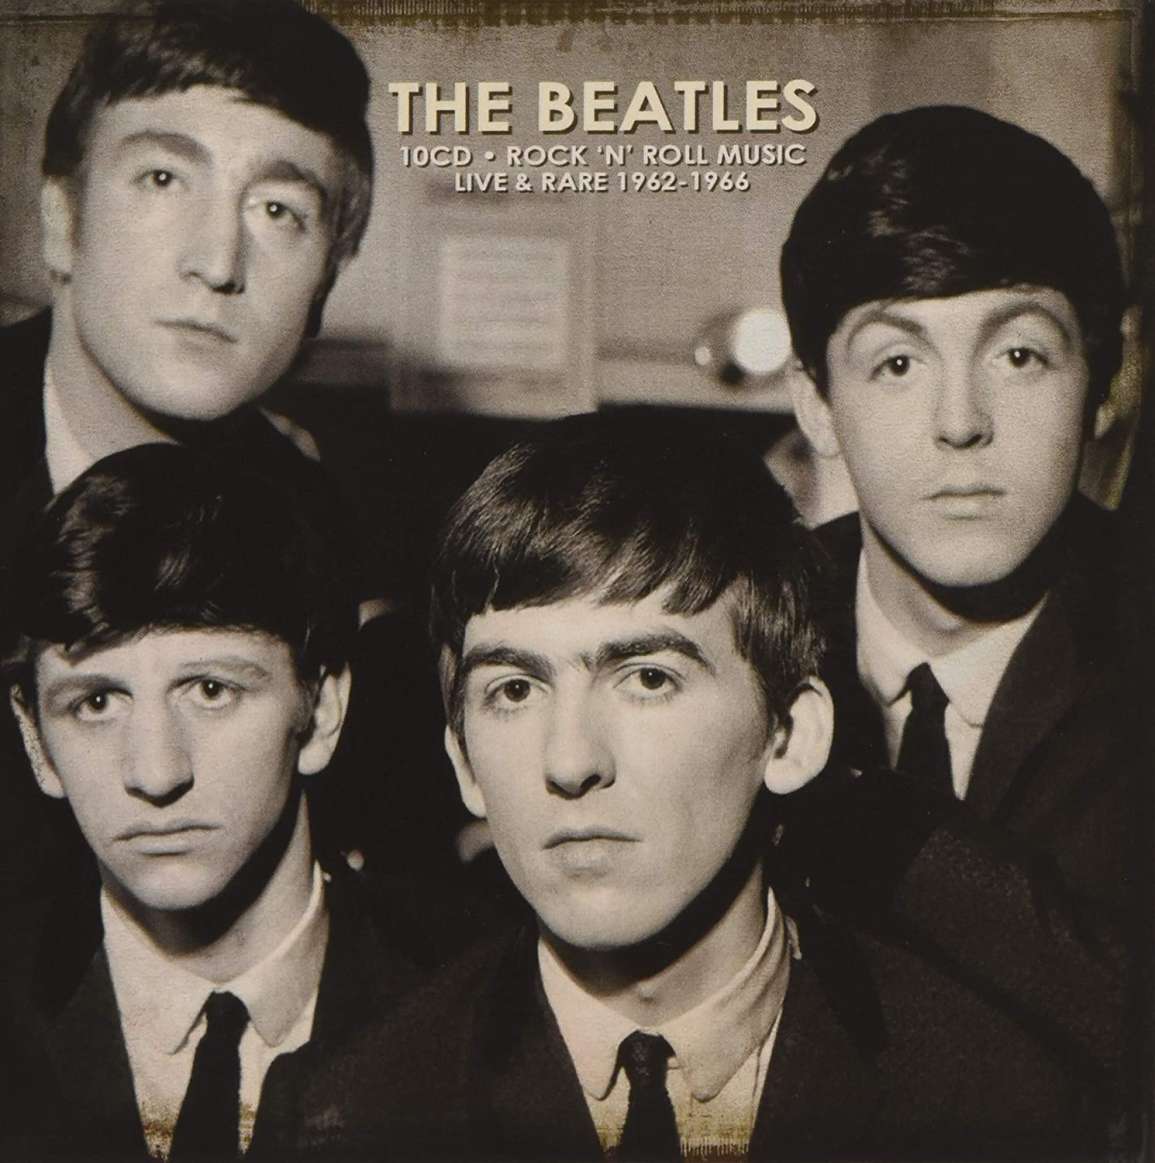 The Beatles: Rock'n'Roll Music Live And Rare 1962 - 1966 (10 CDs) – jpc